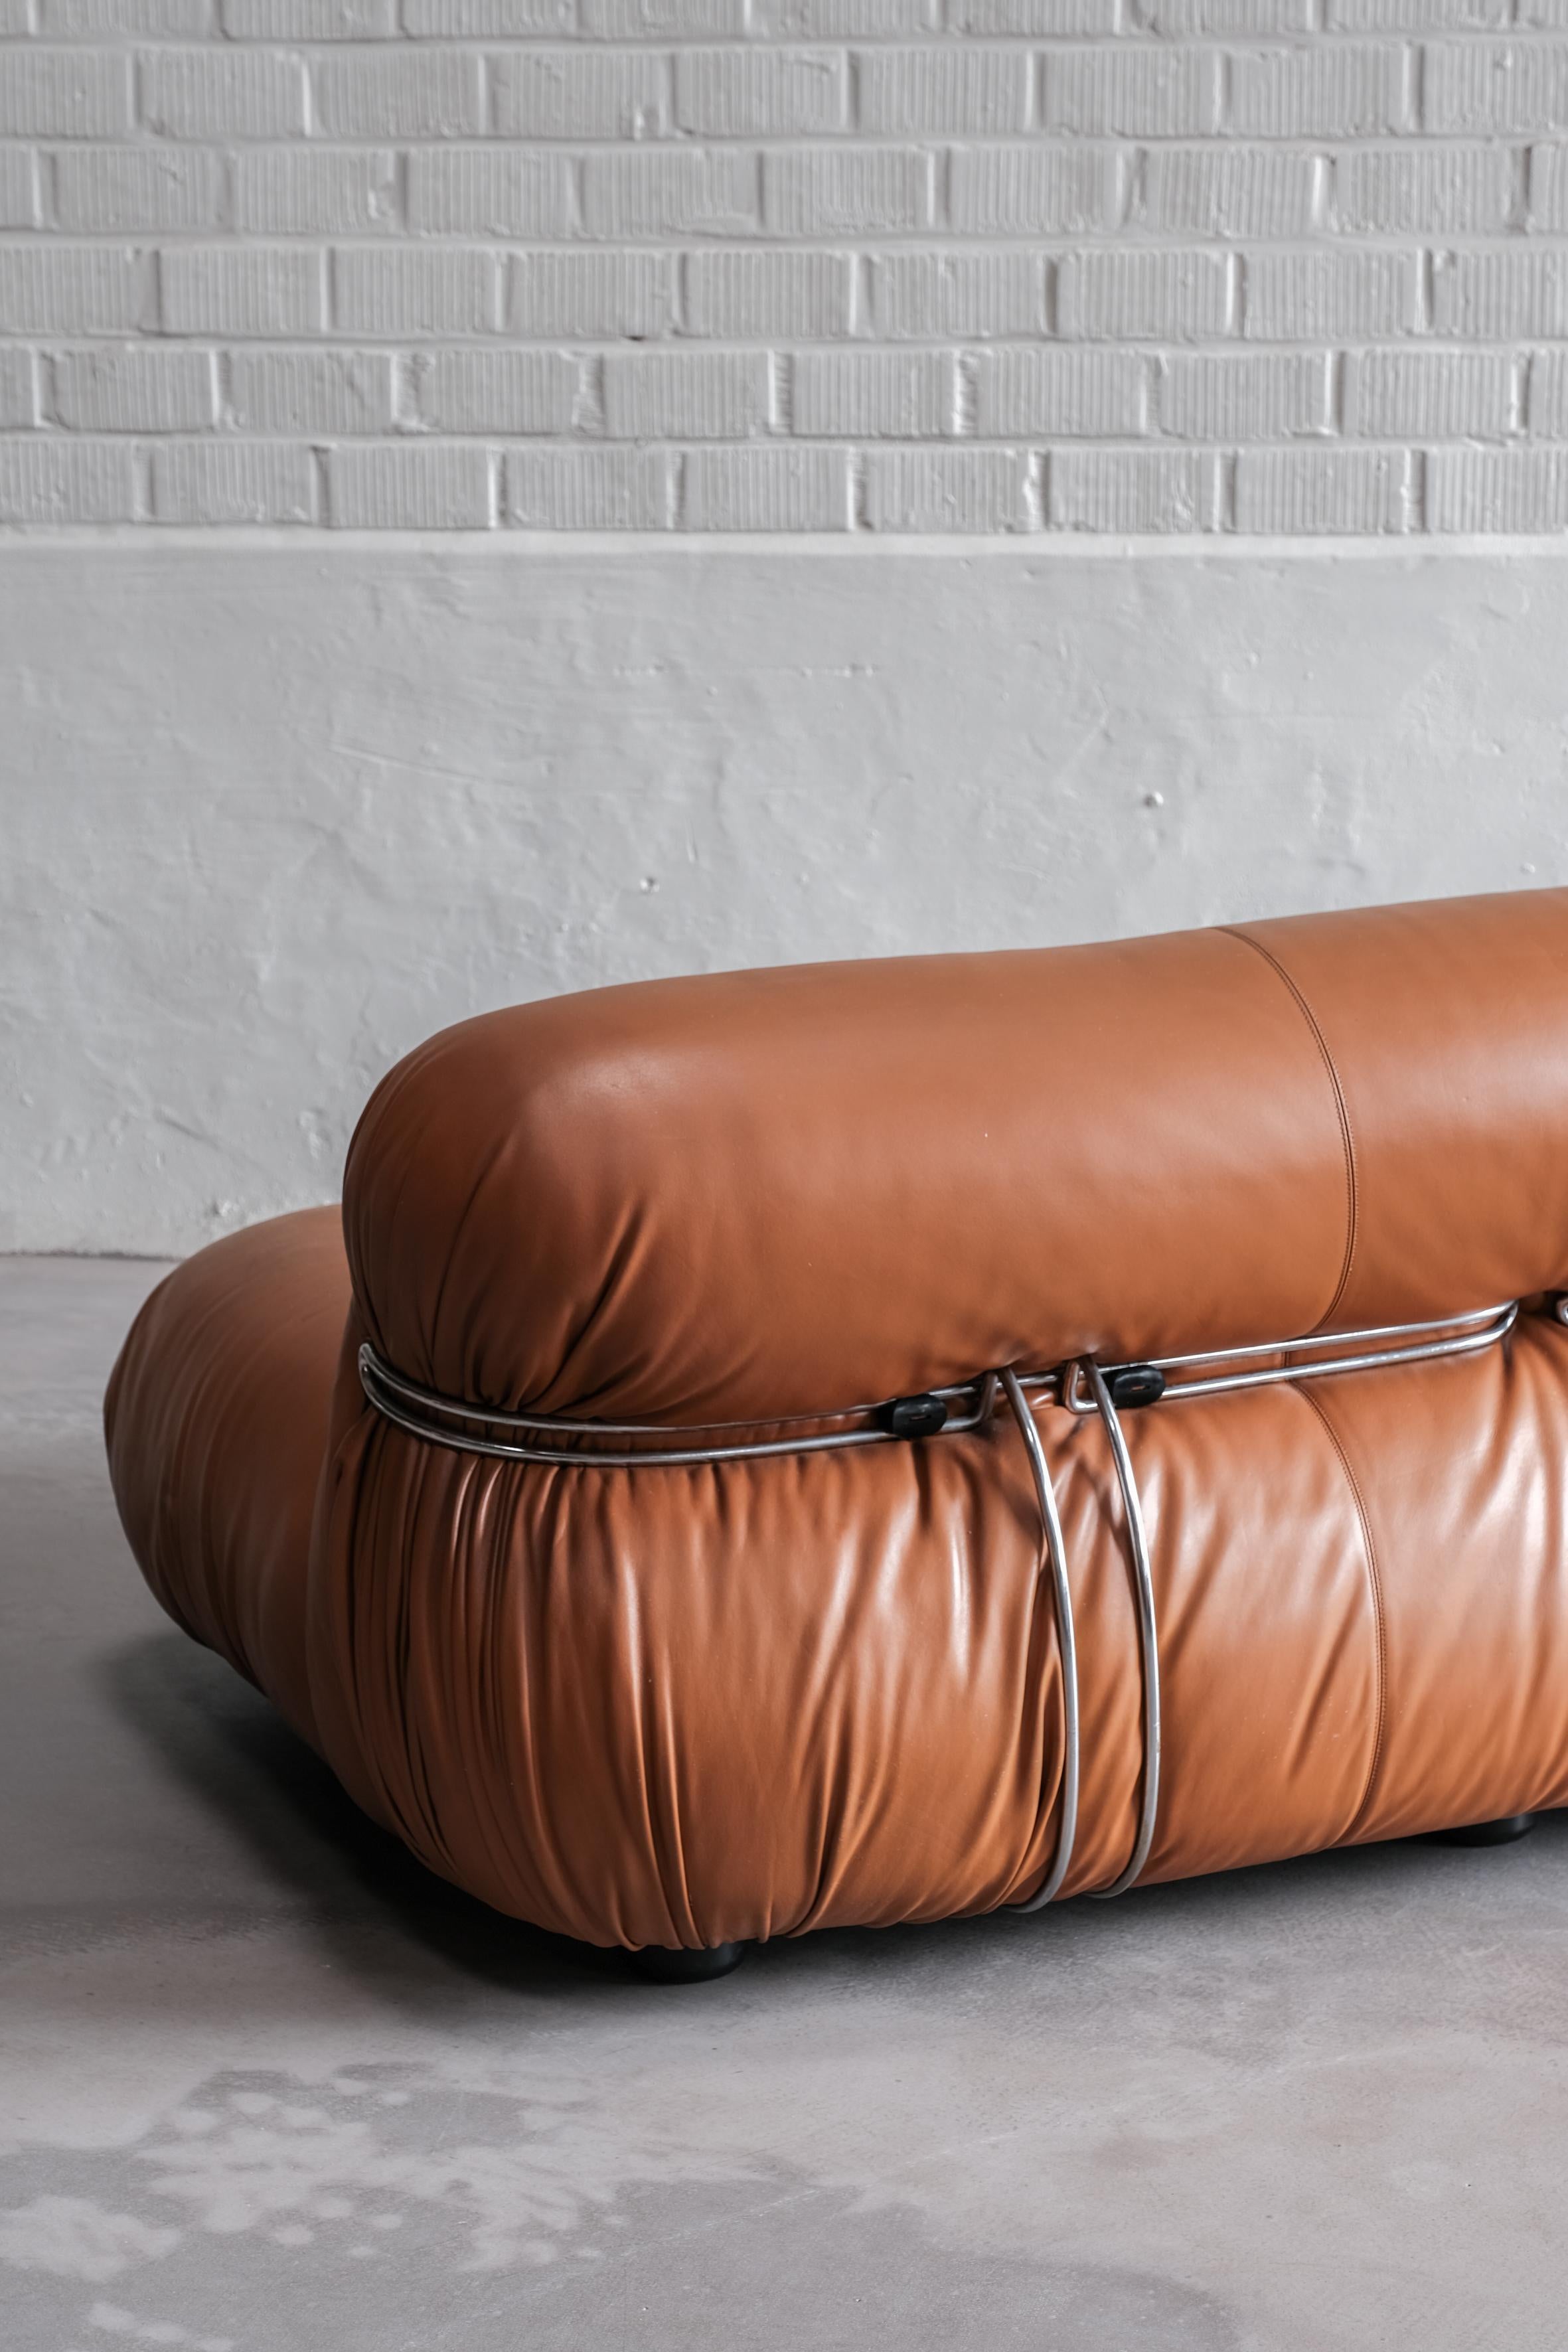 Soriana 4 seater in Cognac leather designed by Afra&Tobia Scarpa or Cassina 70' 4